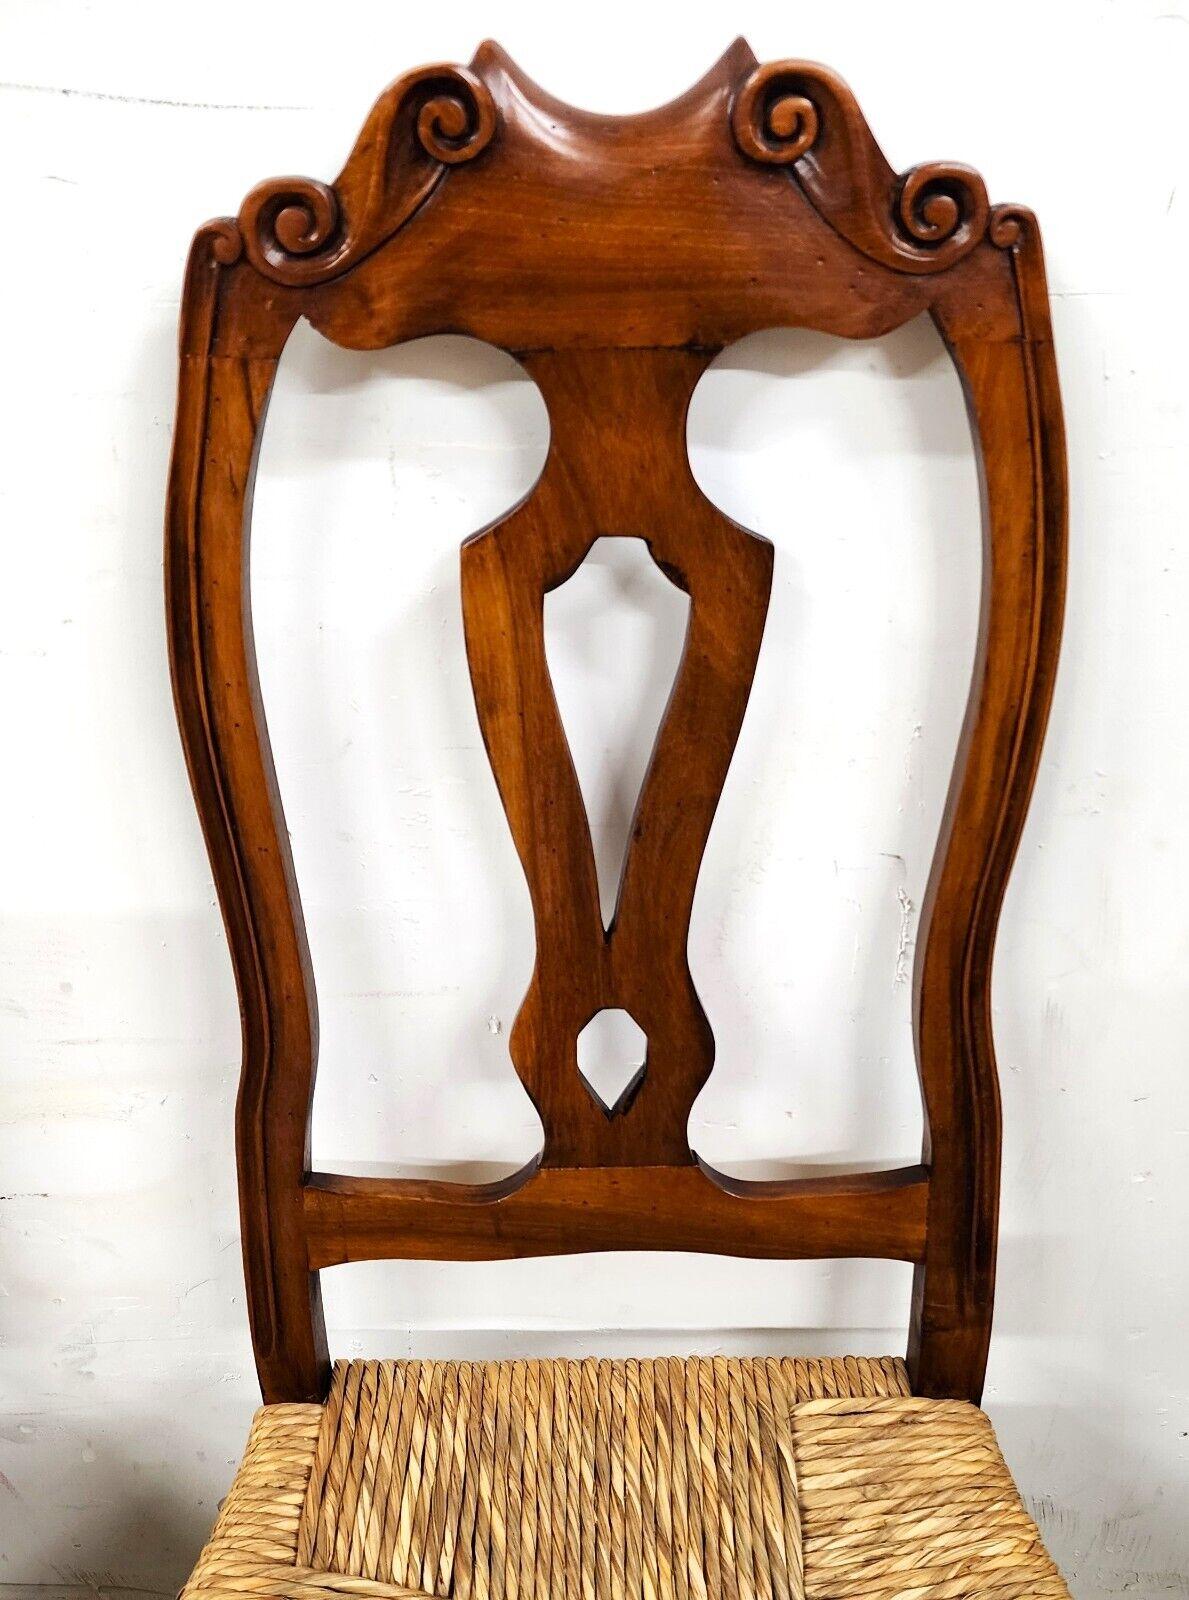 For FULL item description click on CONTINUE READING at the bottom of this page.

Offering One Of Our Recent Palm Beach Estate Fine Furniture Acquisitions Of A
Set of 6 Italian Venetian Solid Walnut Rush Seat Dining Chairs 
All are hand-carved